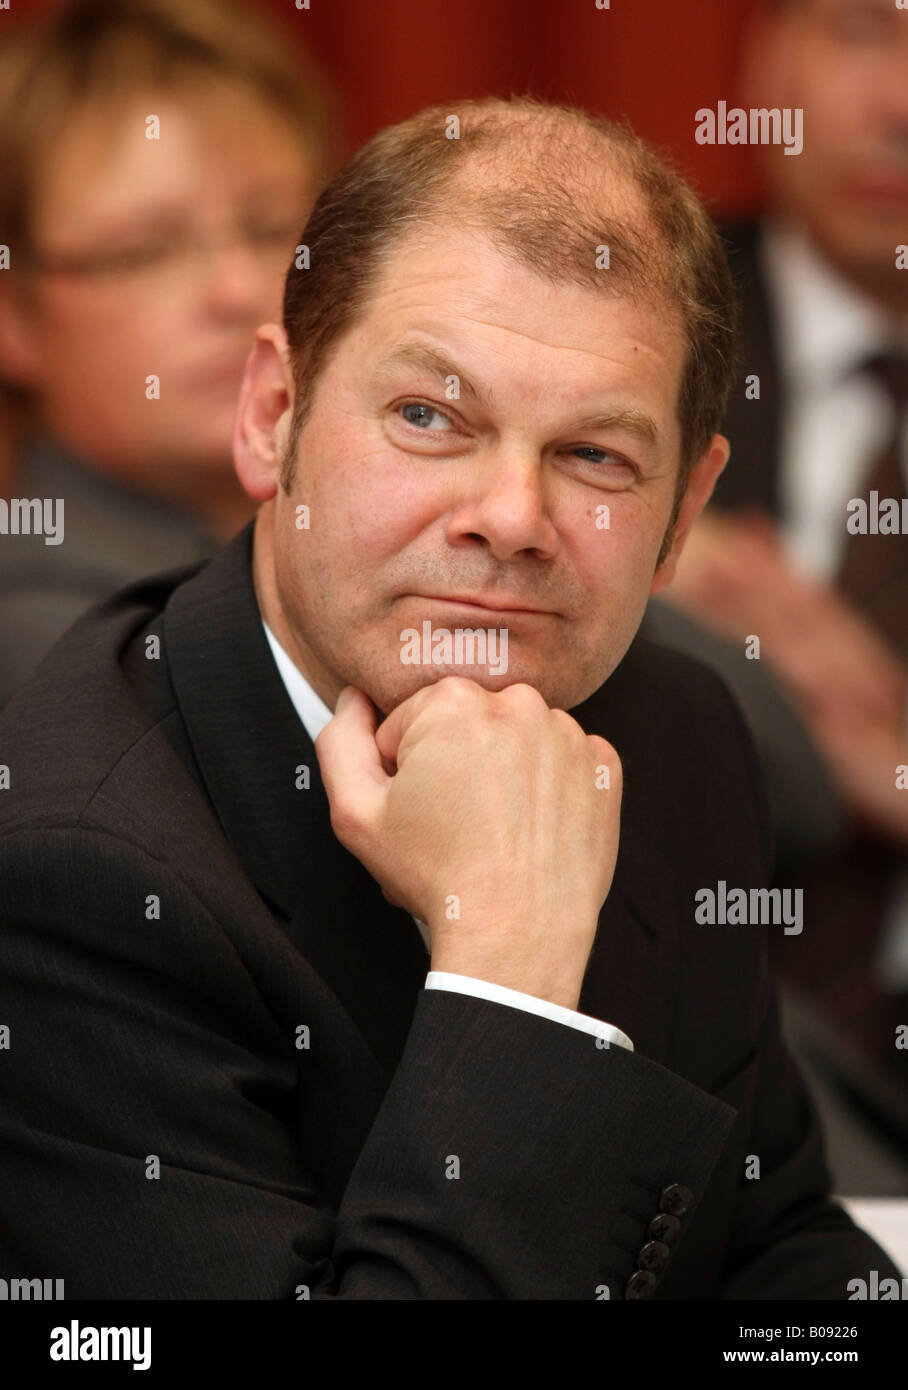 Federal Employment Minister Olaf Scholz (SPD Party) in Weissenthurm, Germany, 01.04.2008 Stock Photo